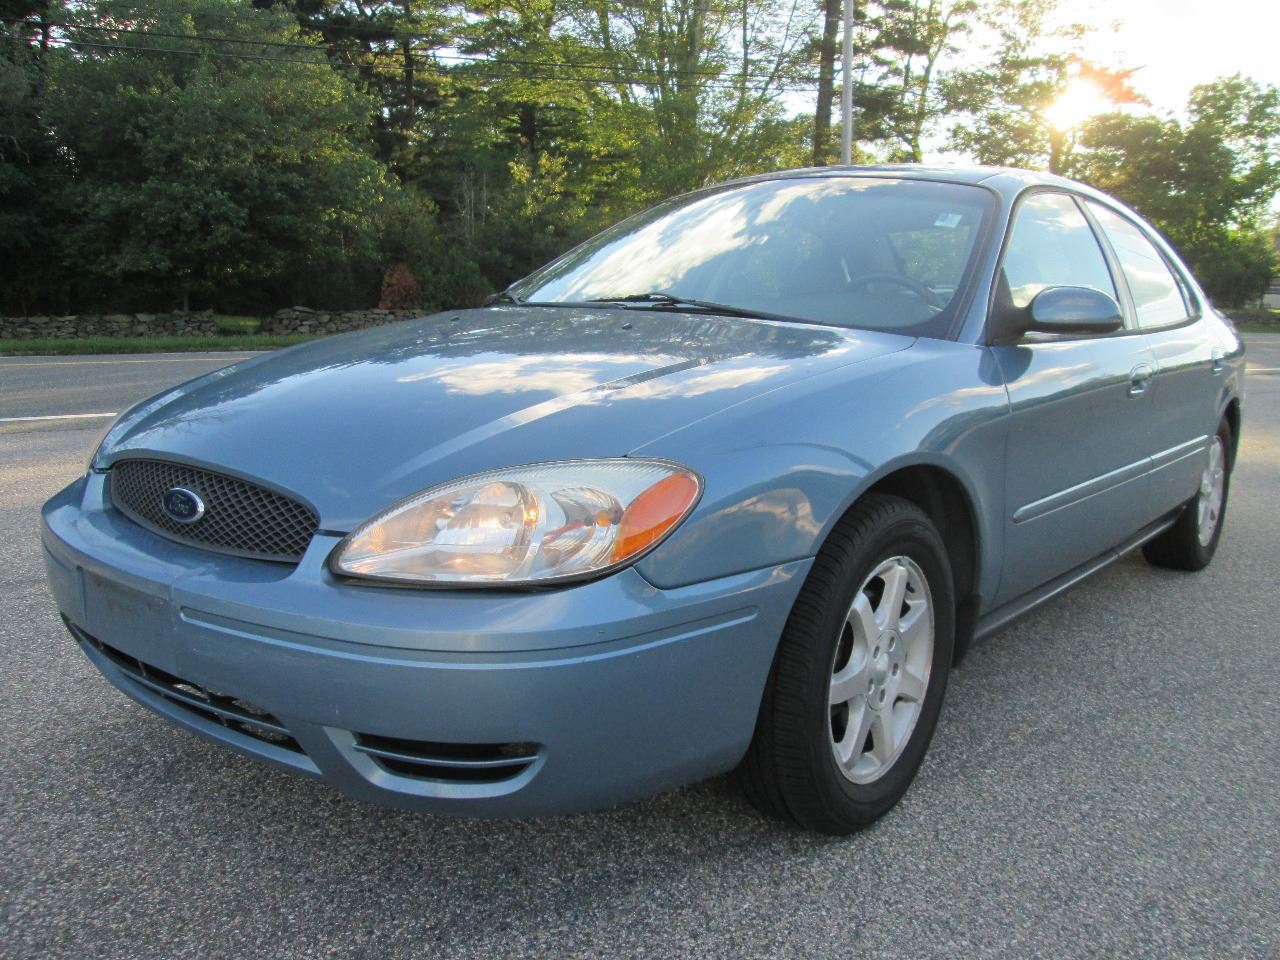 2007 Ford Taurus for sale at Kostyas Auto Sales Inc in Swansea MA